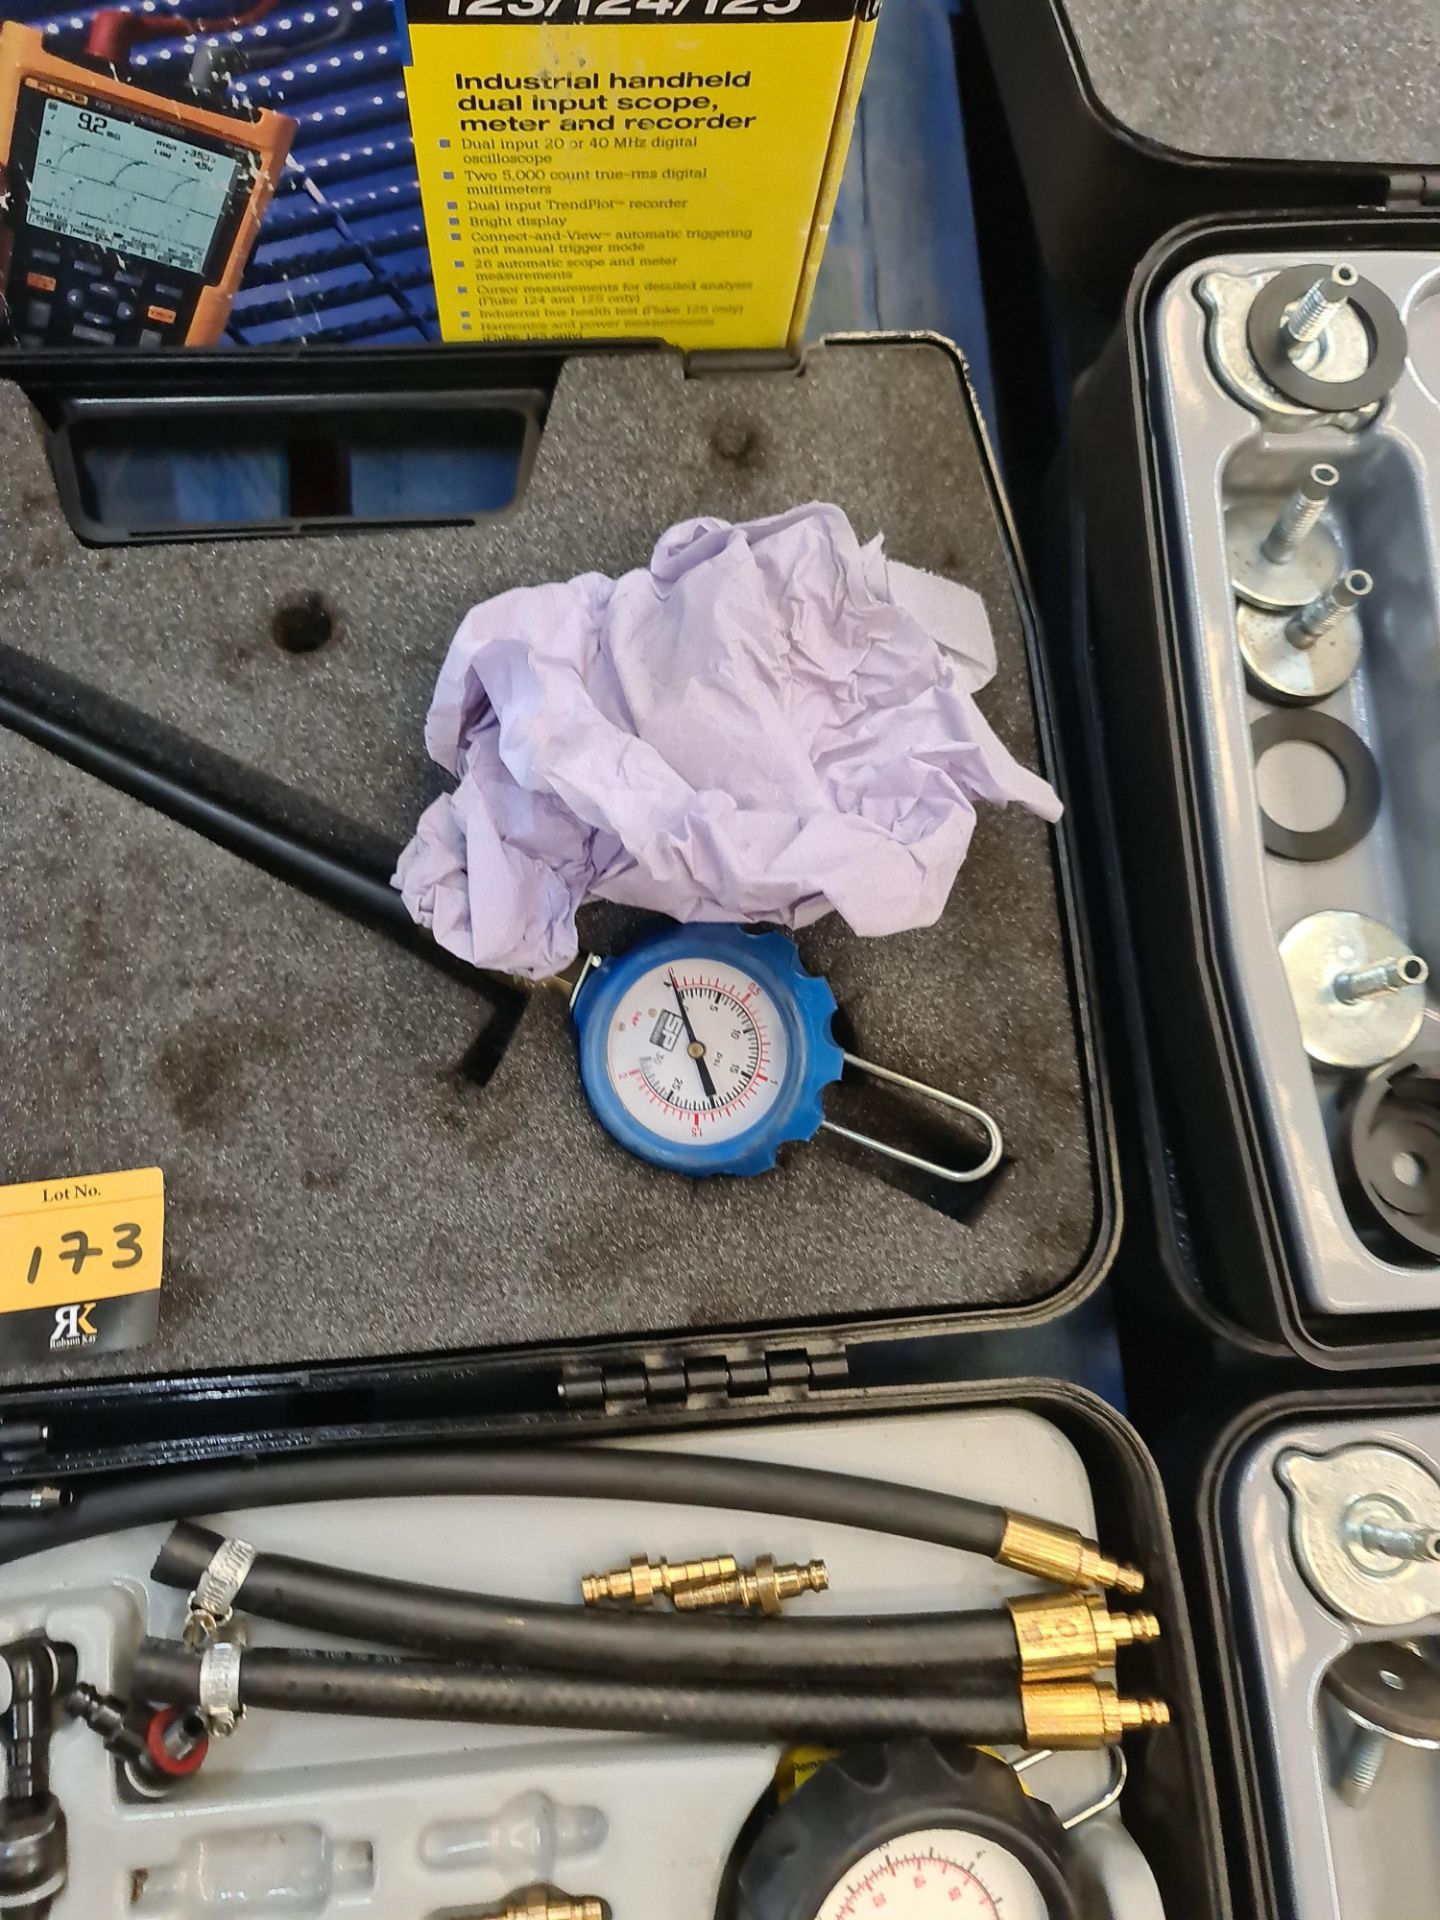 Fuel pressure measurement kit in case with ancillaries - Image 5 of 6